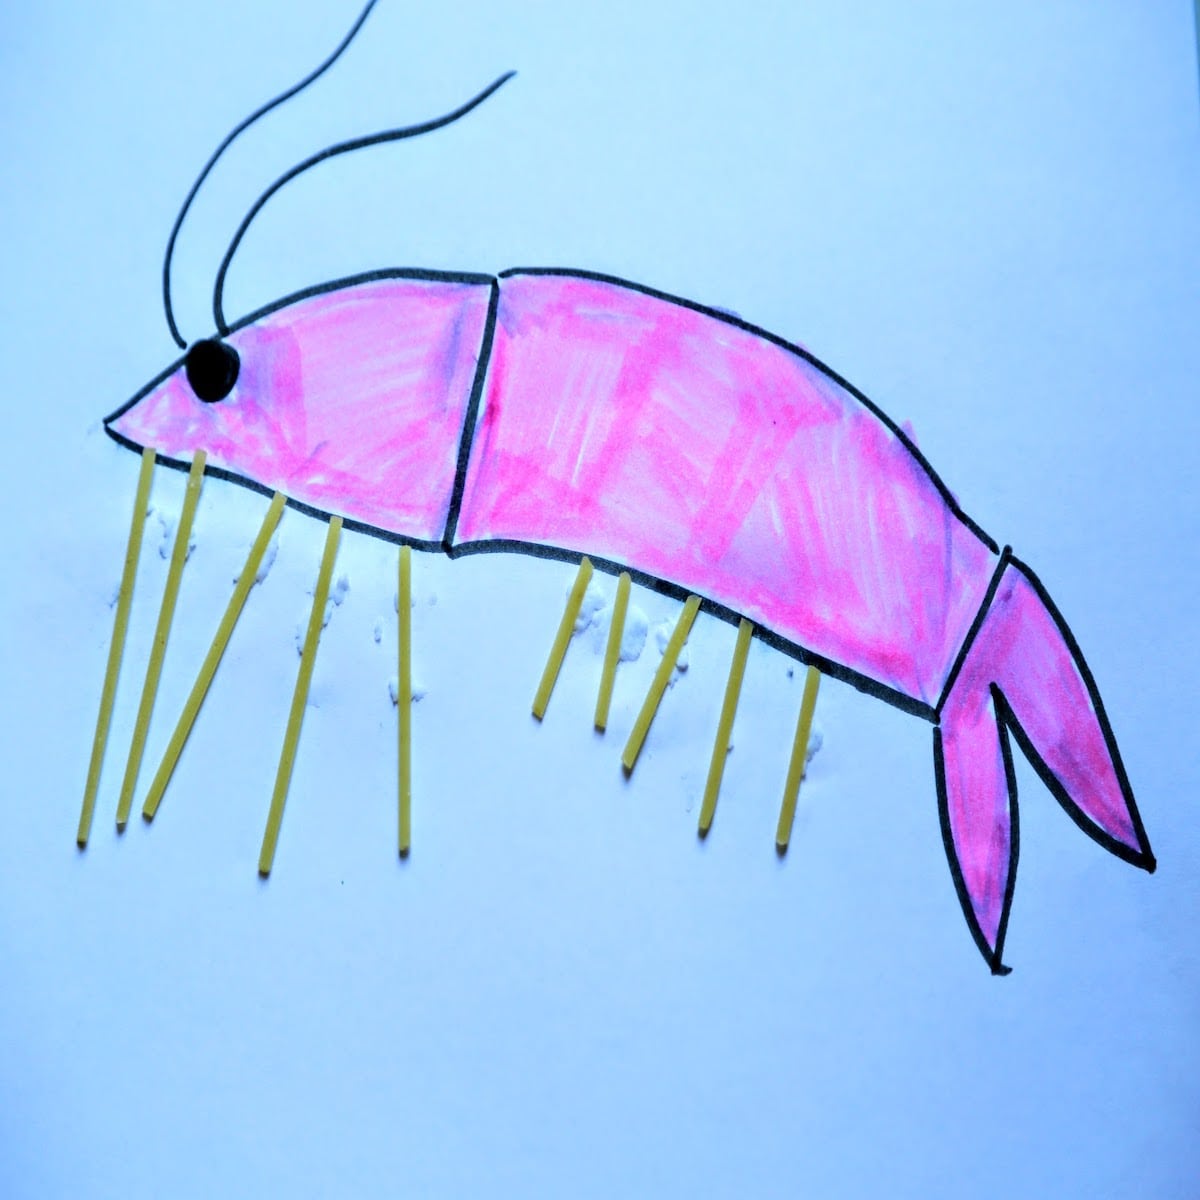 drawing of a pink shrimp with pasta for legs